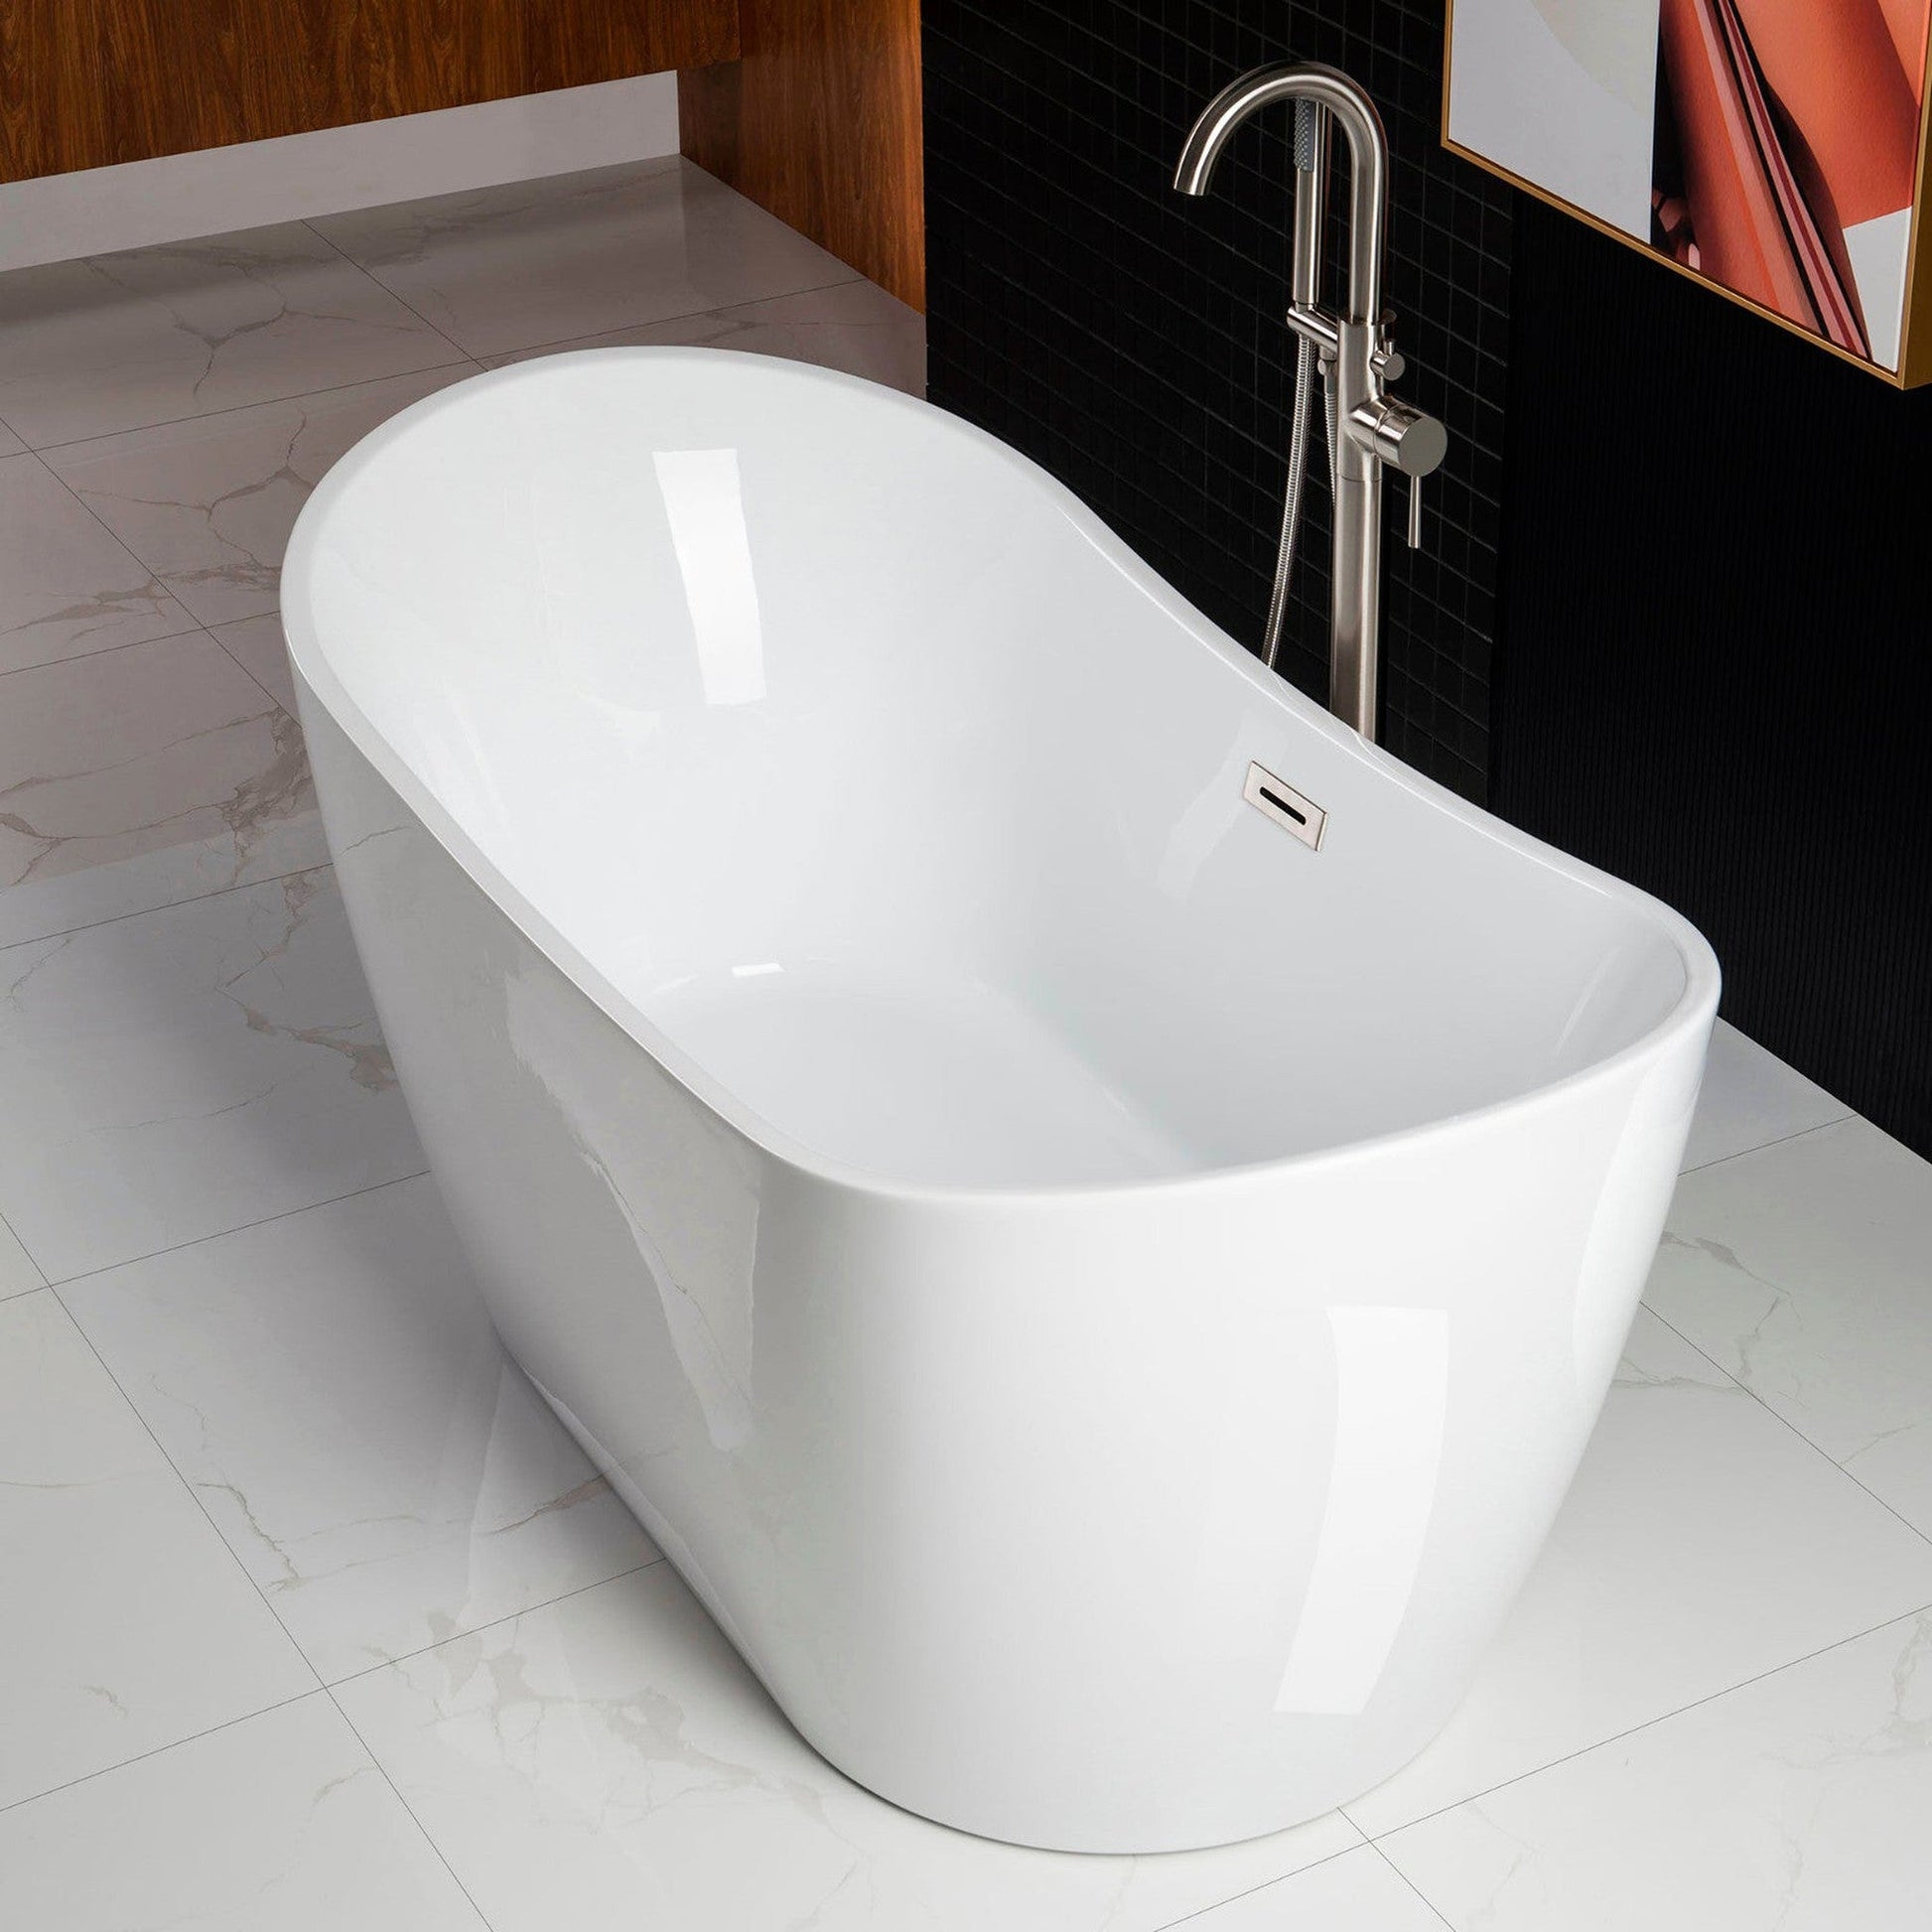 WoodBridge B0016 59" White Acrylic Freestanding Soaking Bathtub With Brushed Nickel Drain, Overflow, F0070BNVT Tub Filler and Caddy Tray